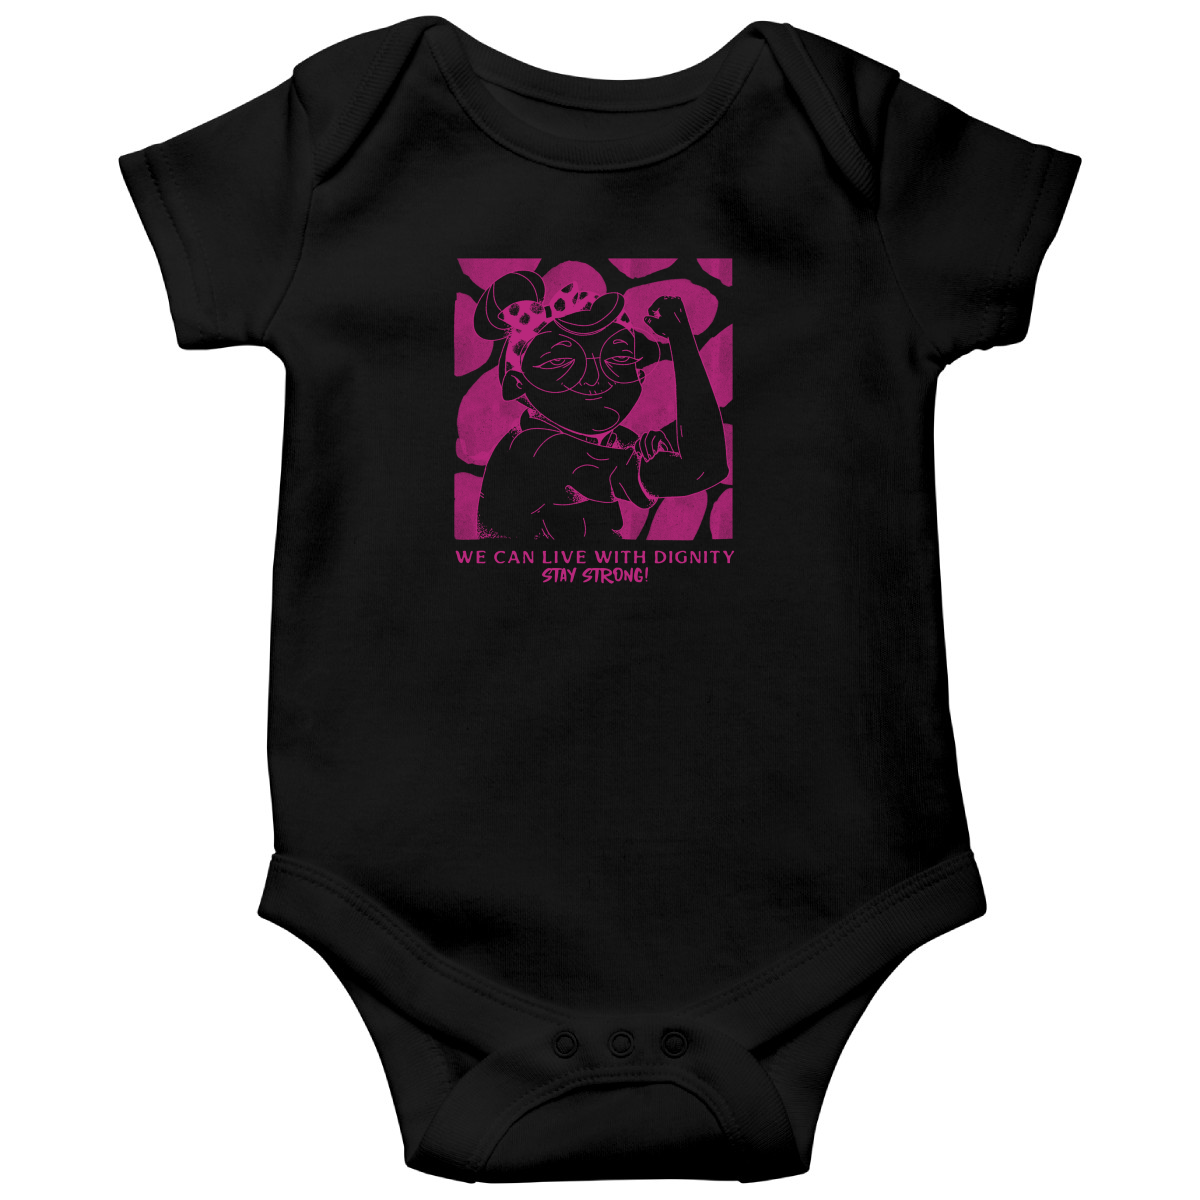 We can live with dignity STAY STRONG! Baby Bodysuits | Black